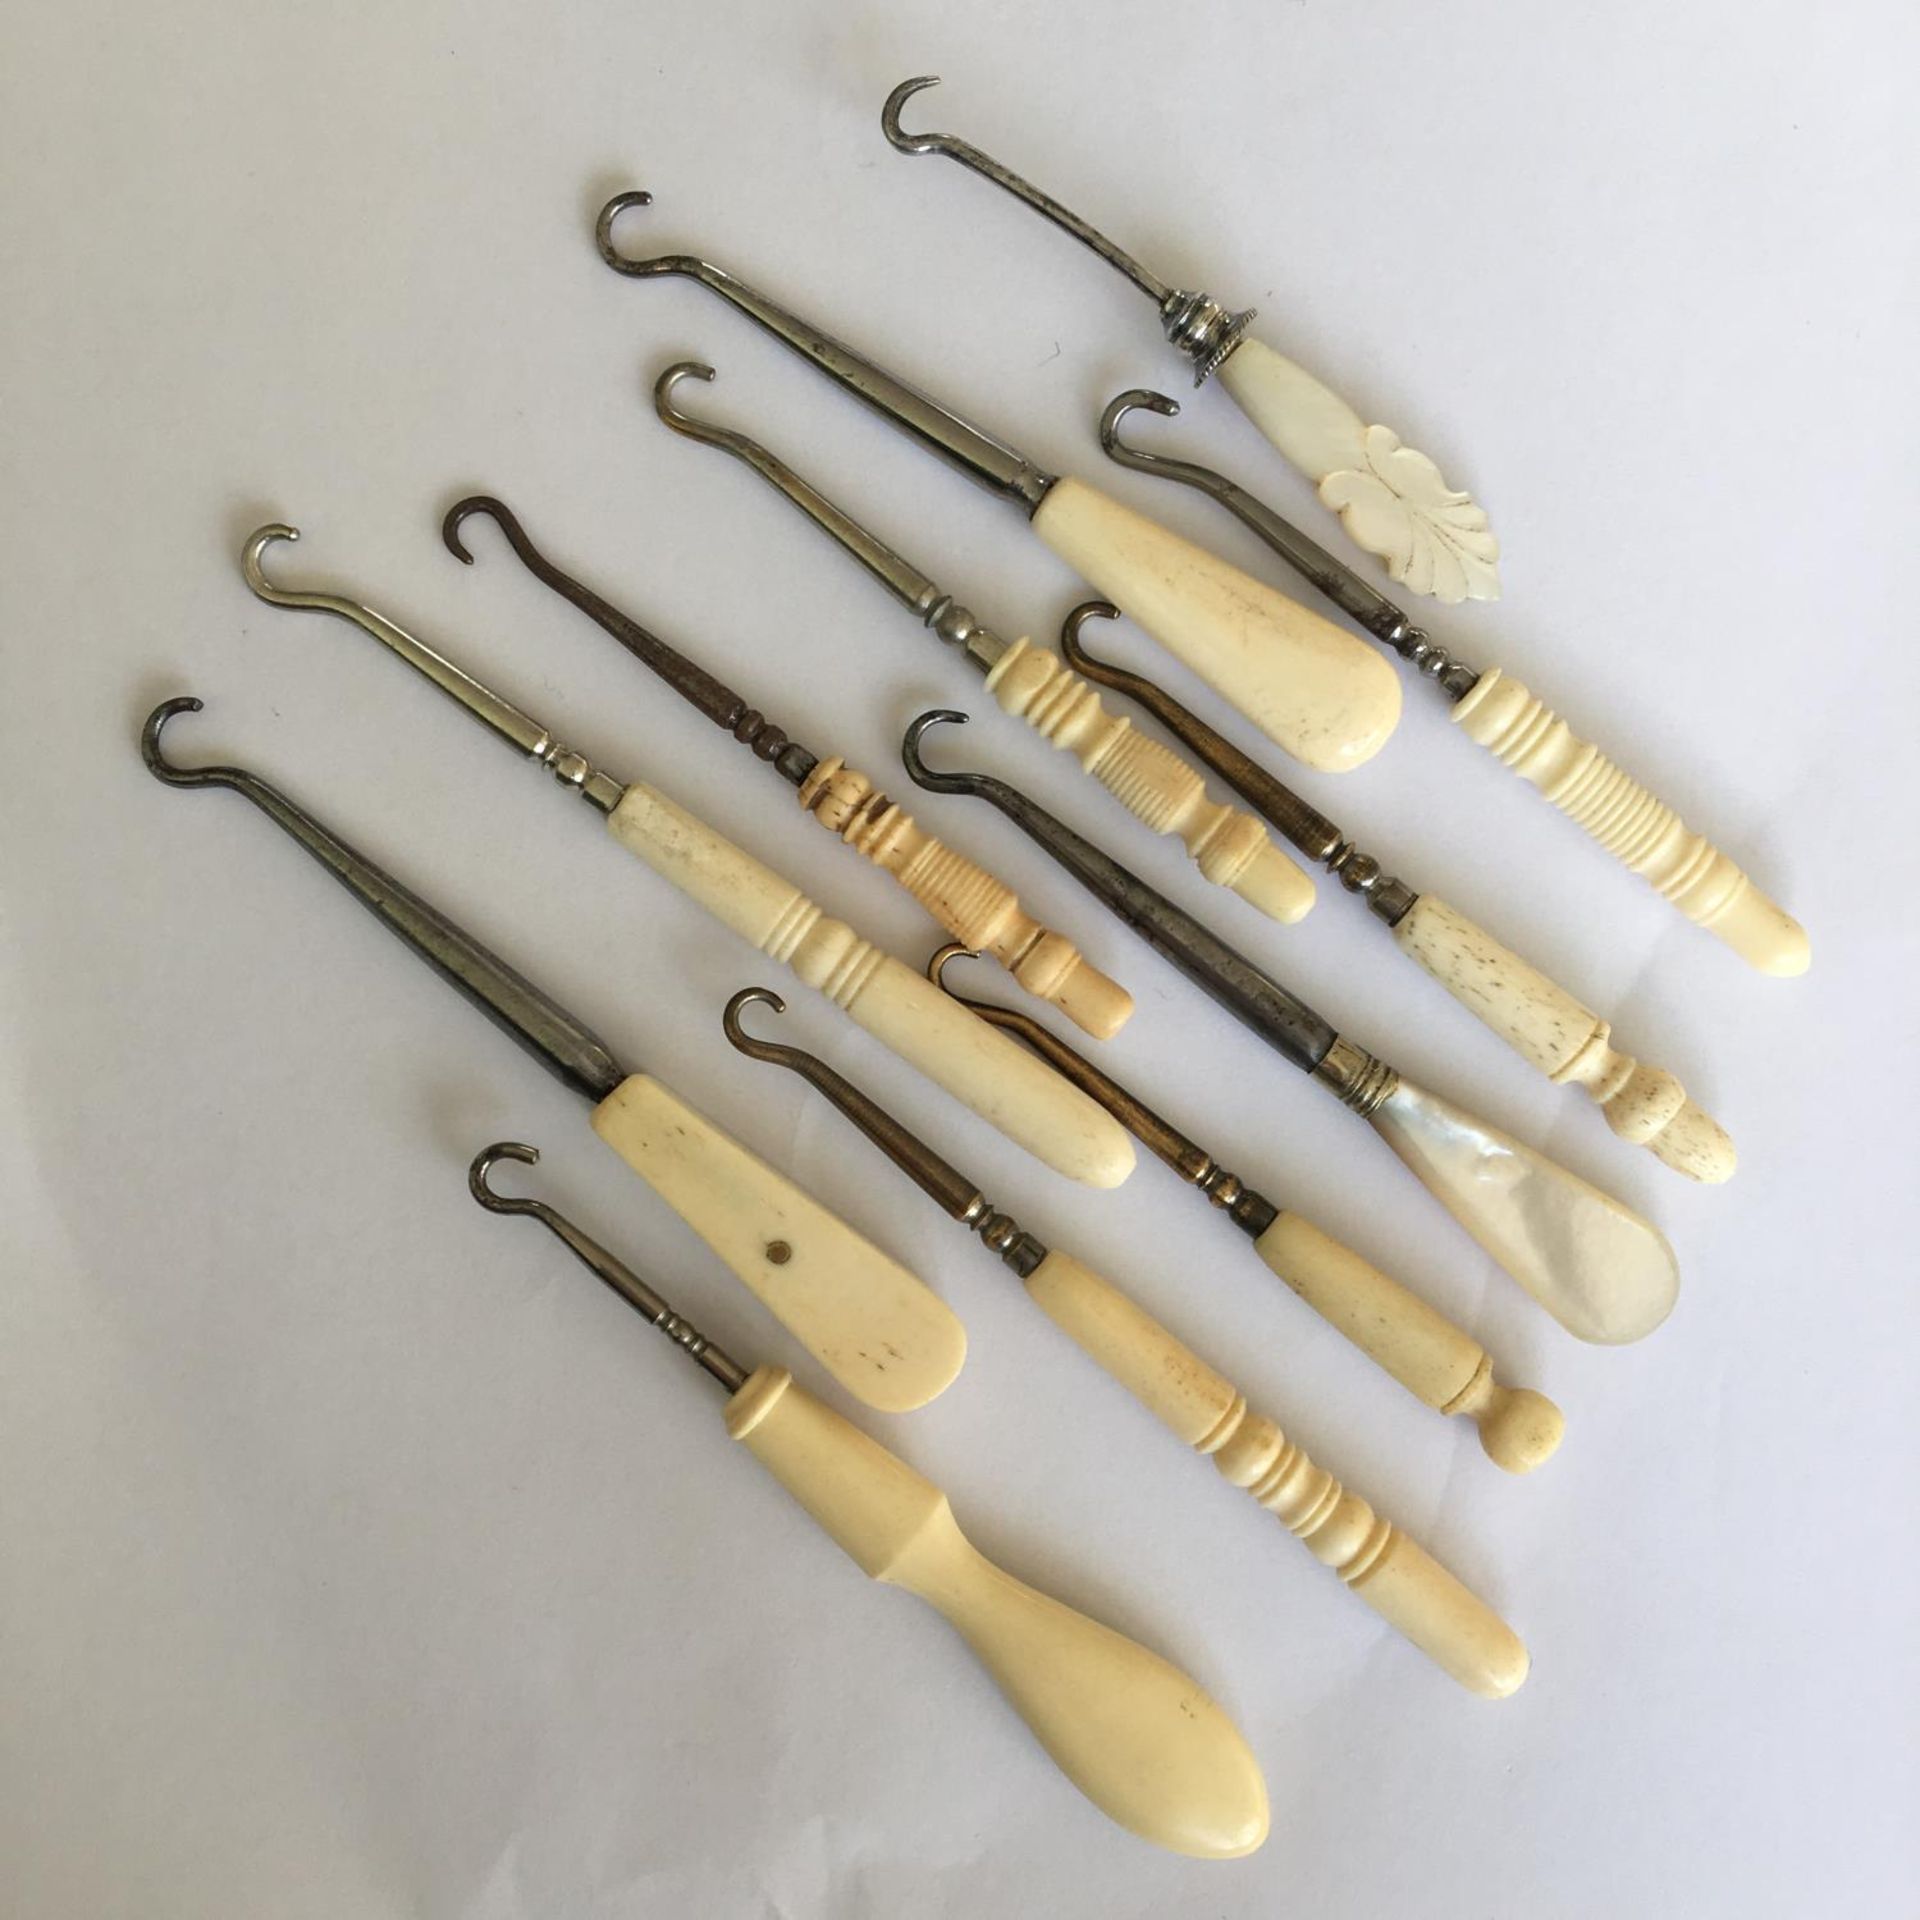 Group of twelve small (7 - 9cm) vintage lace or button hooks